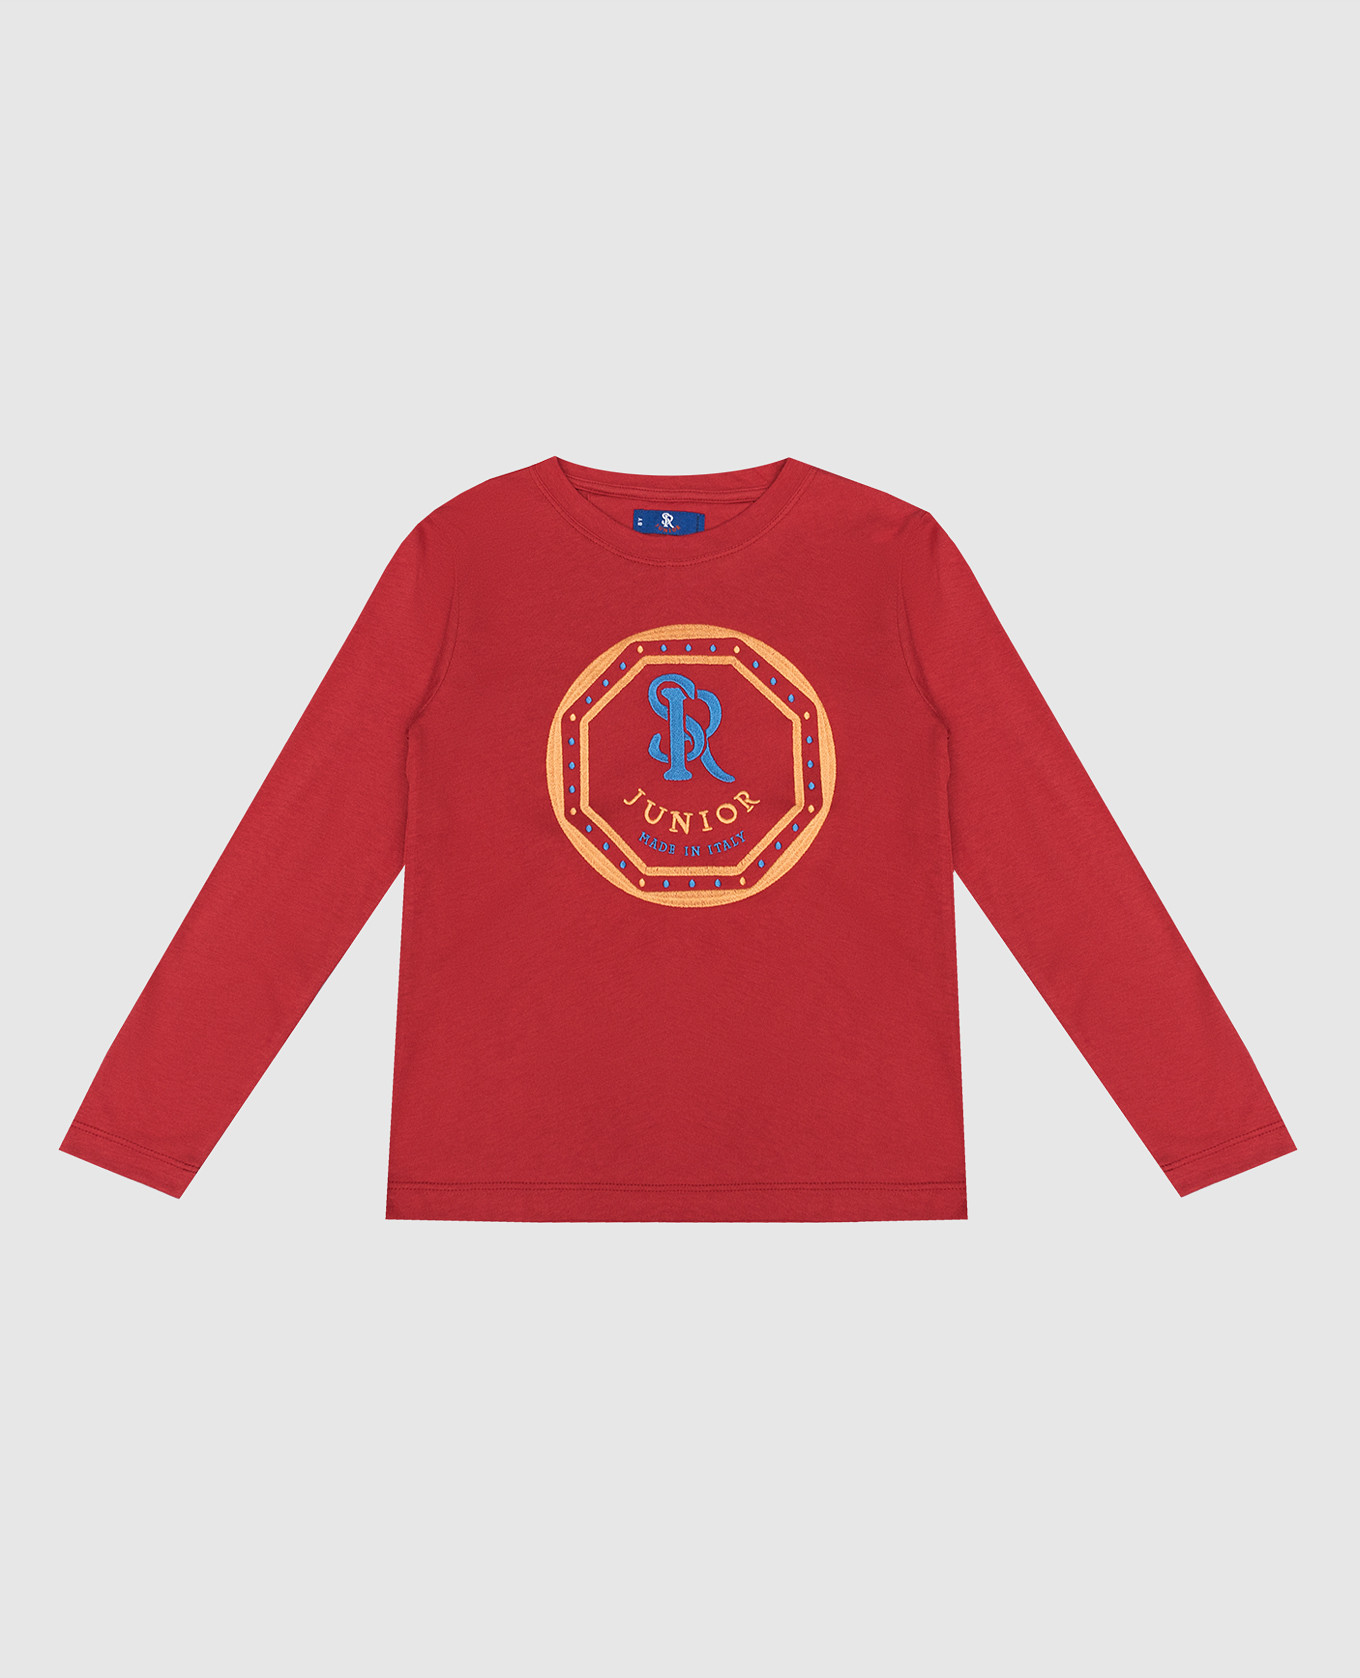 Children's red longsleeve with logo embroidery